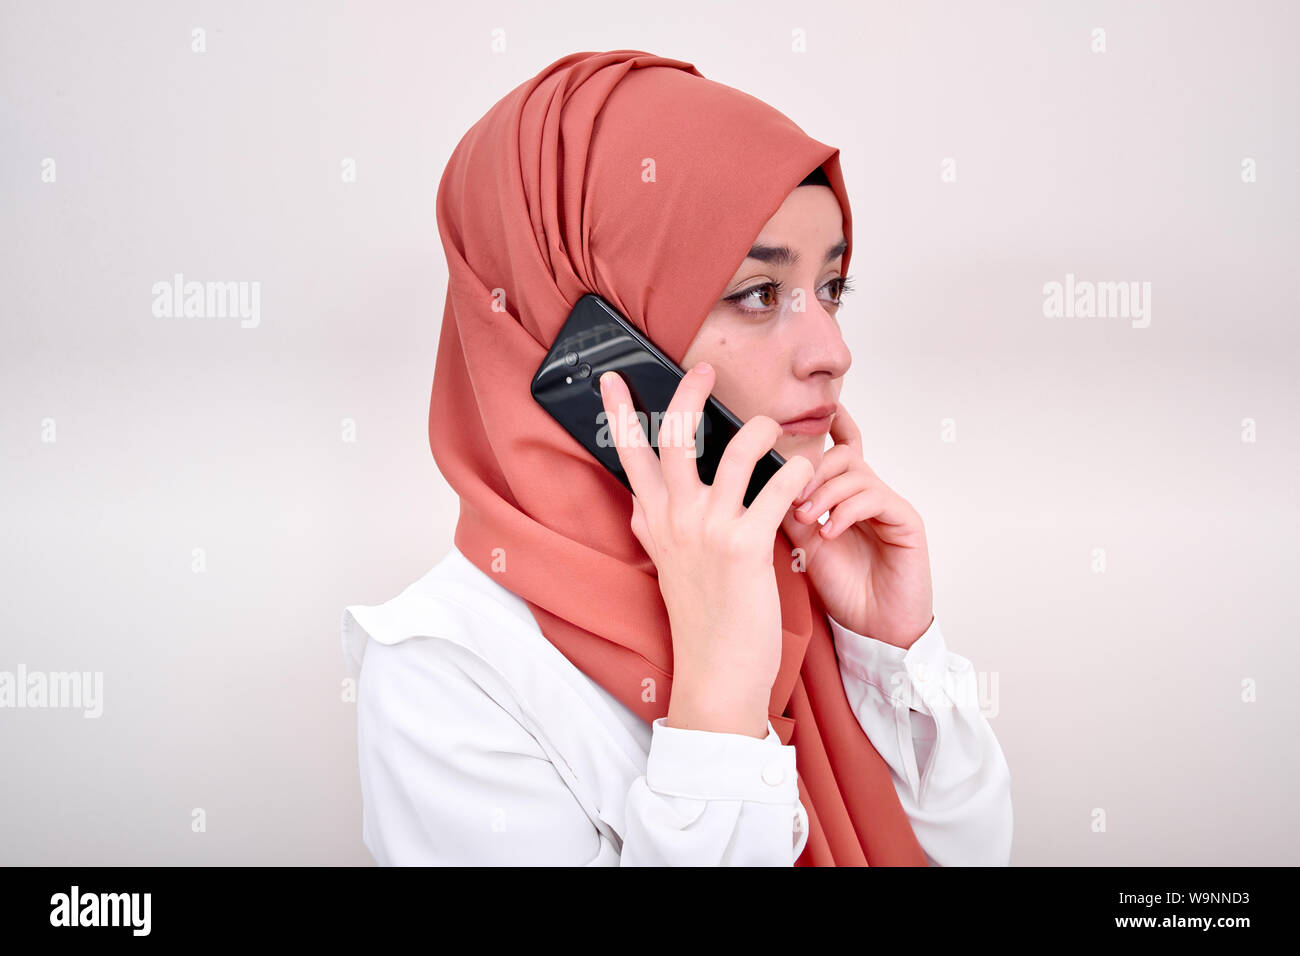 Muslim woman calling, hijab girl standing and calling with mobile phone Stock Photo